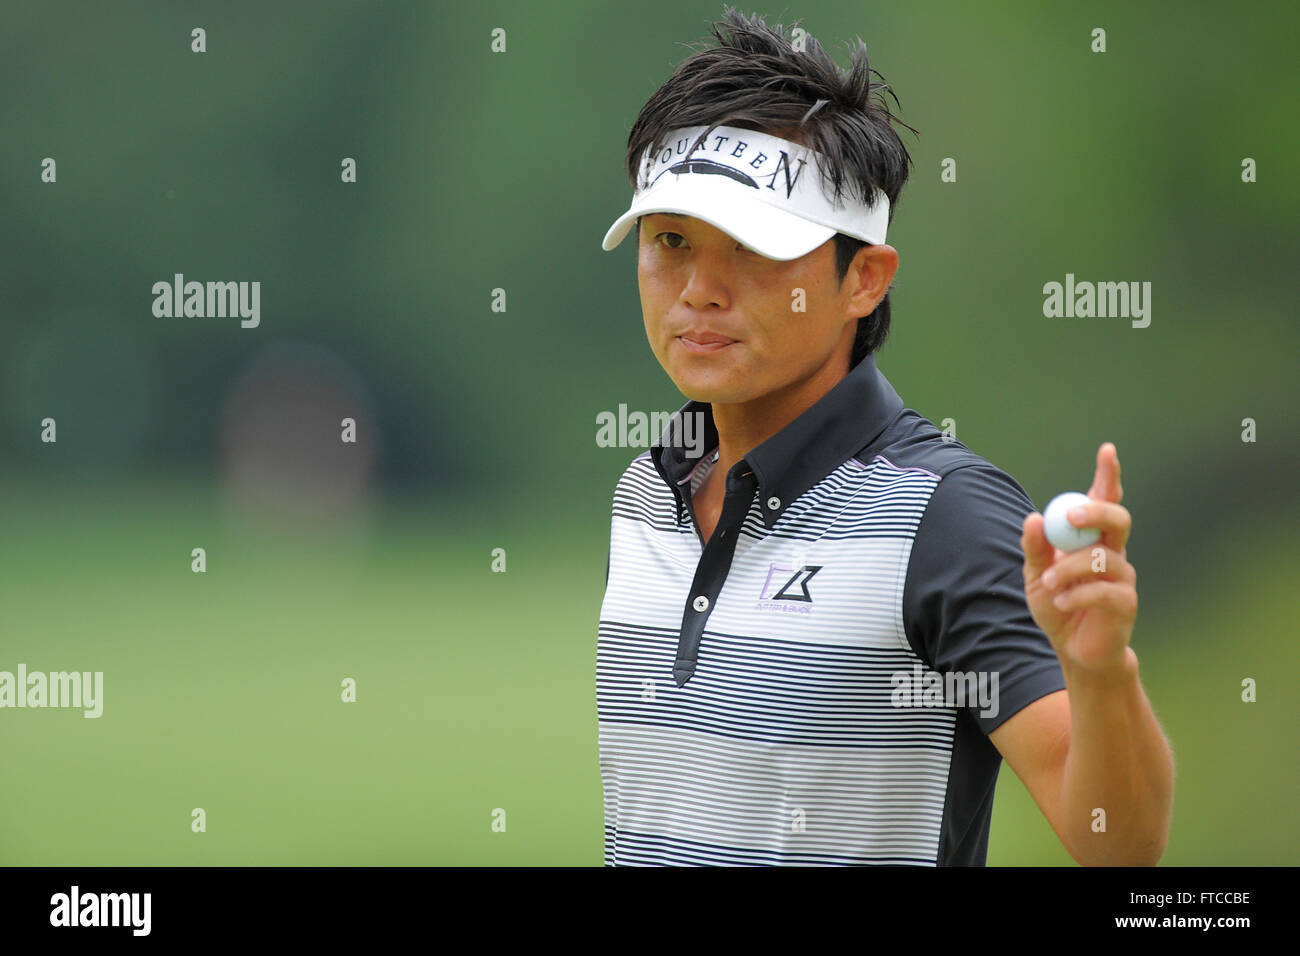 Charlotte, North Carolina, USA. 6th May, 2012. Ryuji Imada during the final round of the Wells Fargo Championship at the Quail Hollow Club on May 6, 2012 in Charlotte, N.C. ZUMA PRESS/ Scott A. Miller. © Scott A. Miller/ZUMA Wire/Alamy Live News Stock Photo